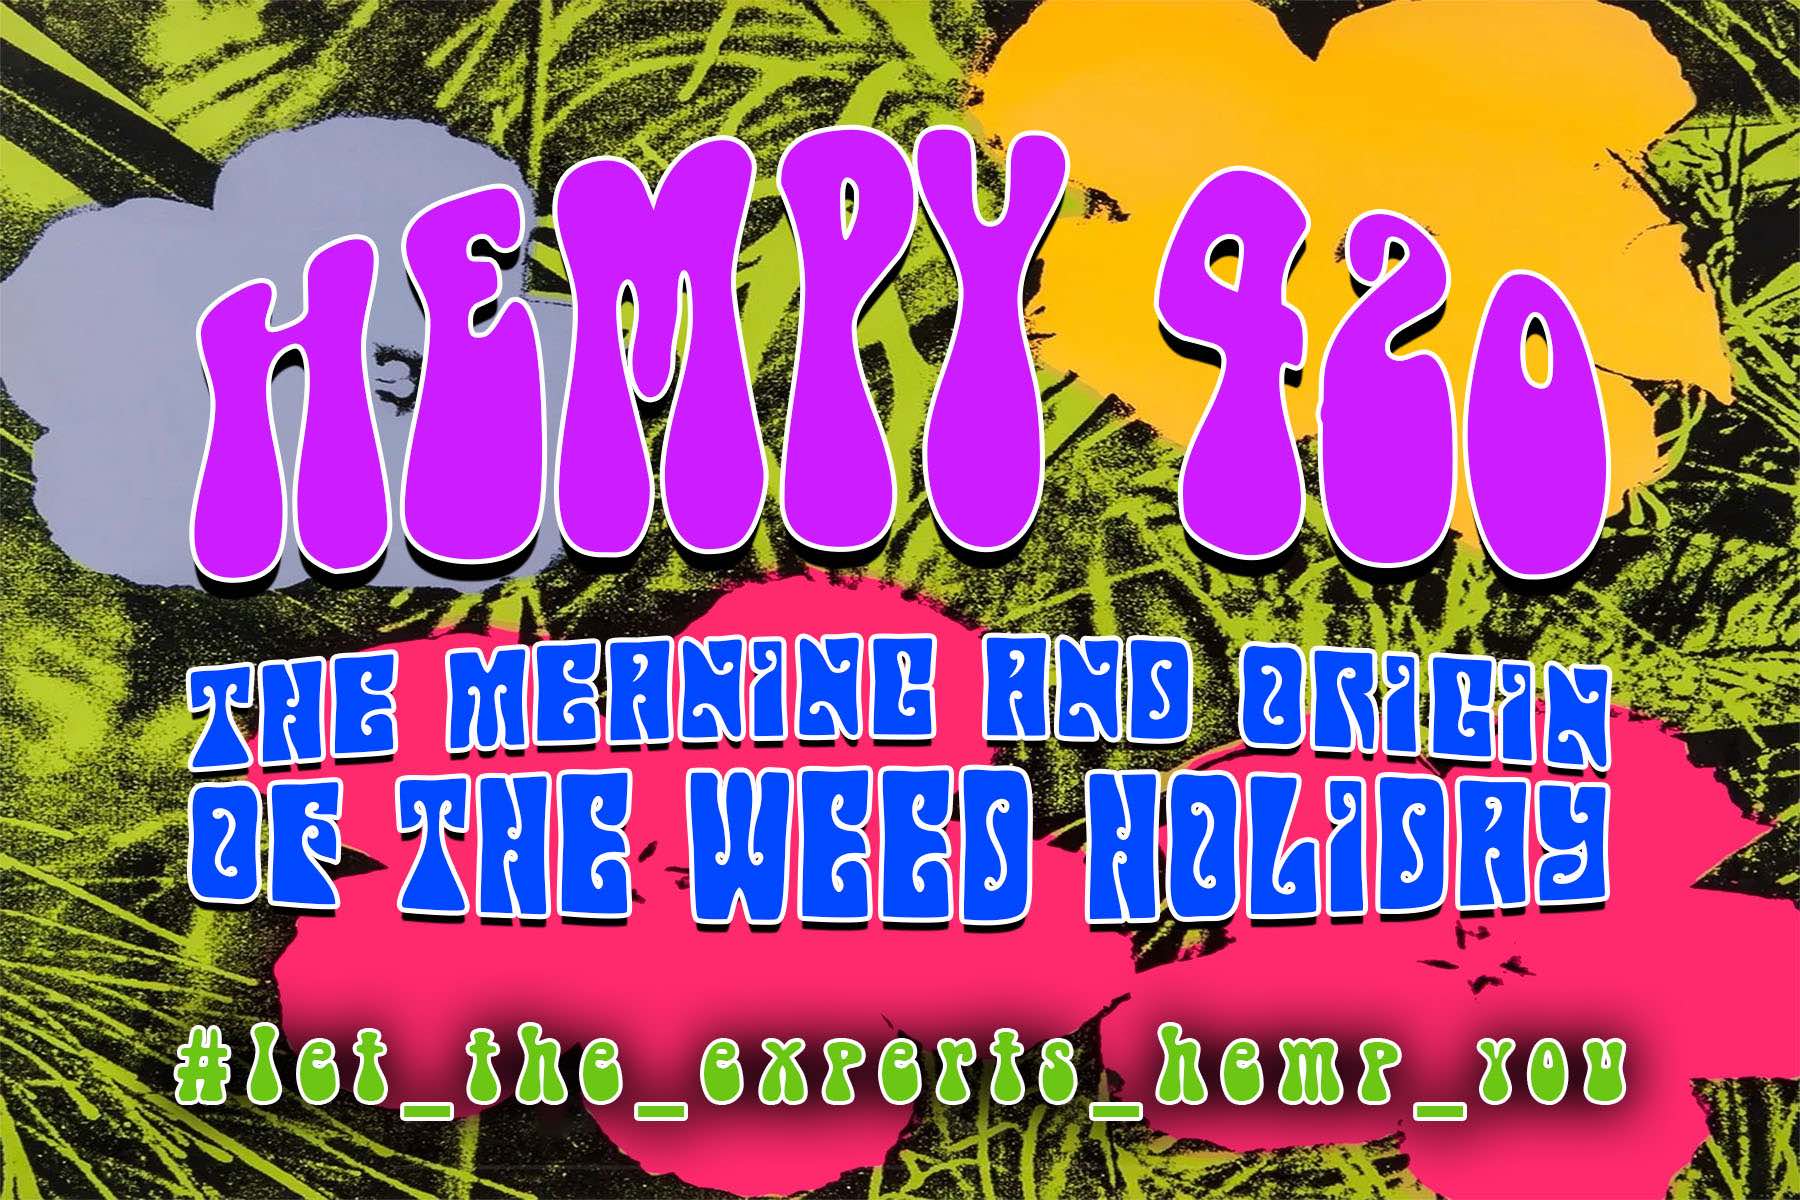 420: The Meaning and Origin of the Weed Holiday